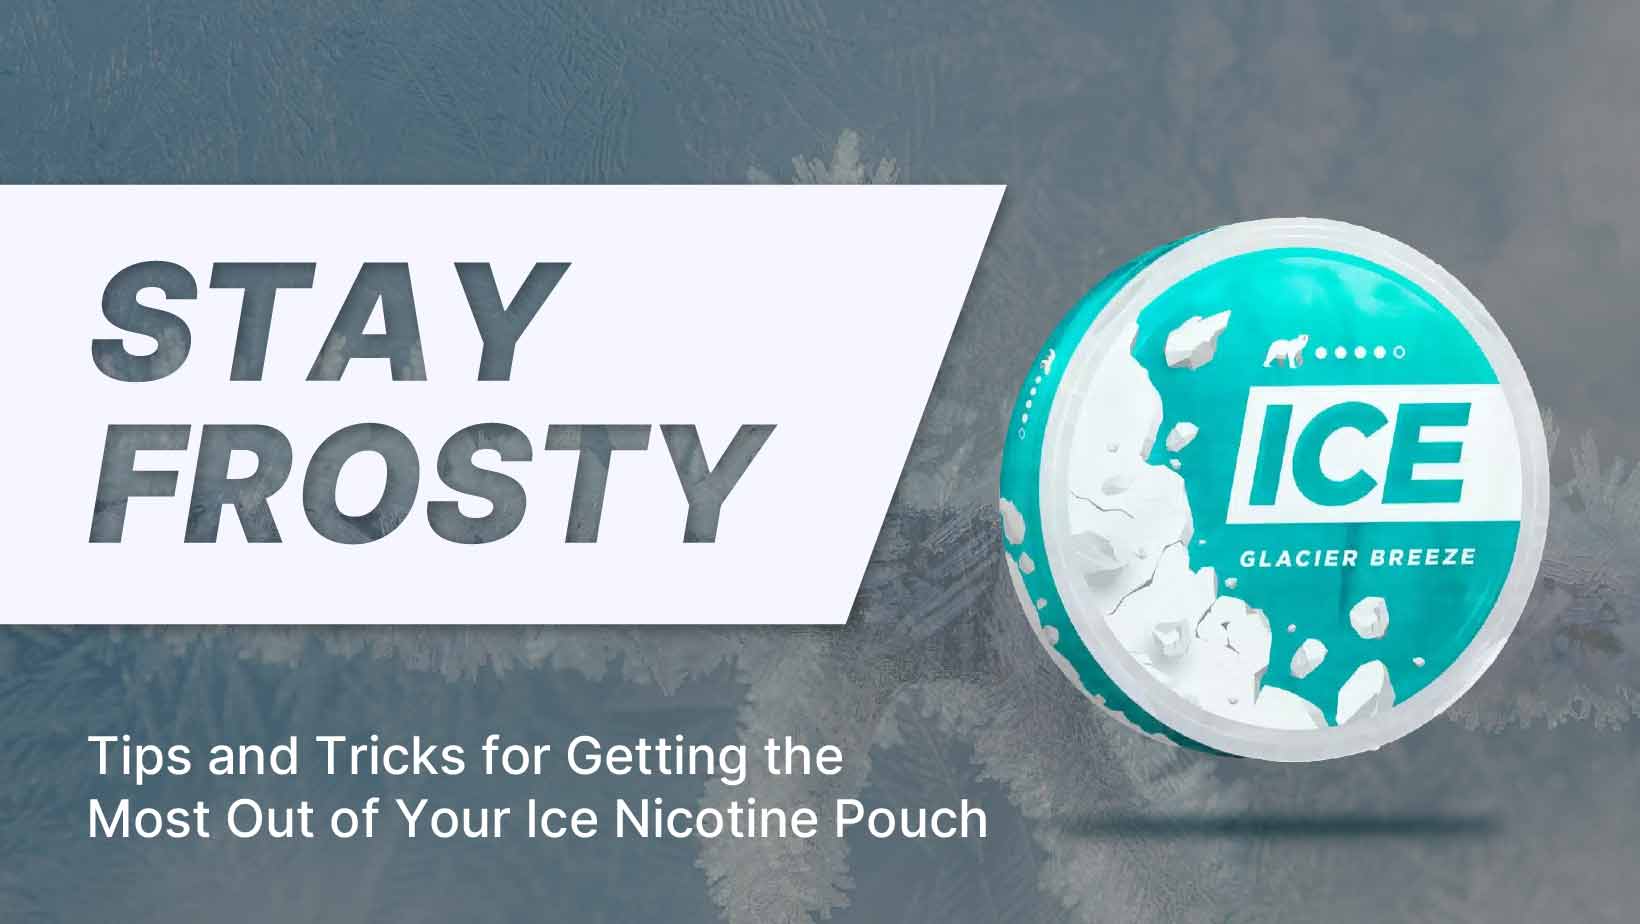 Getting the Most Out of Your Ice Nicotine Pouch